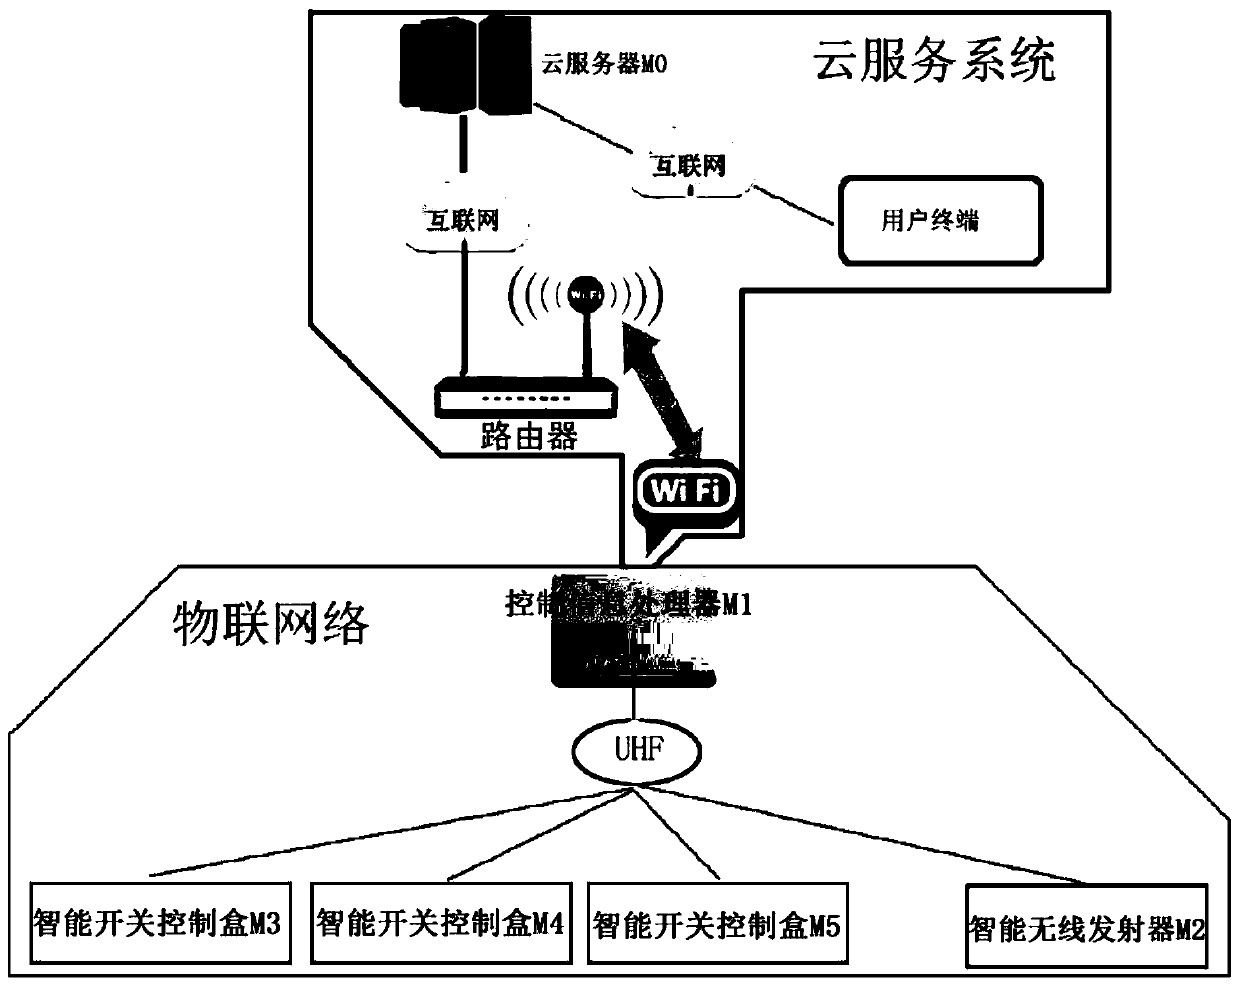 Internet-of-Things-based intelligent electrical appliance switch control system and control method thereof